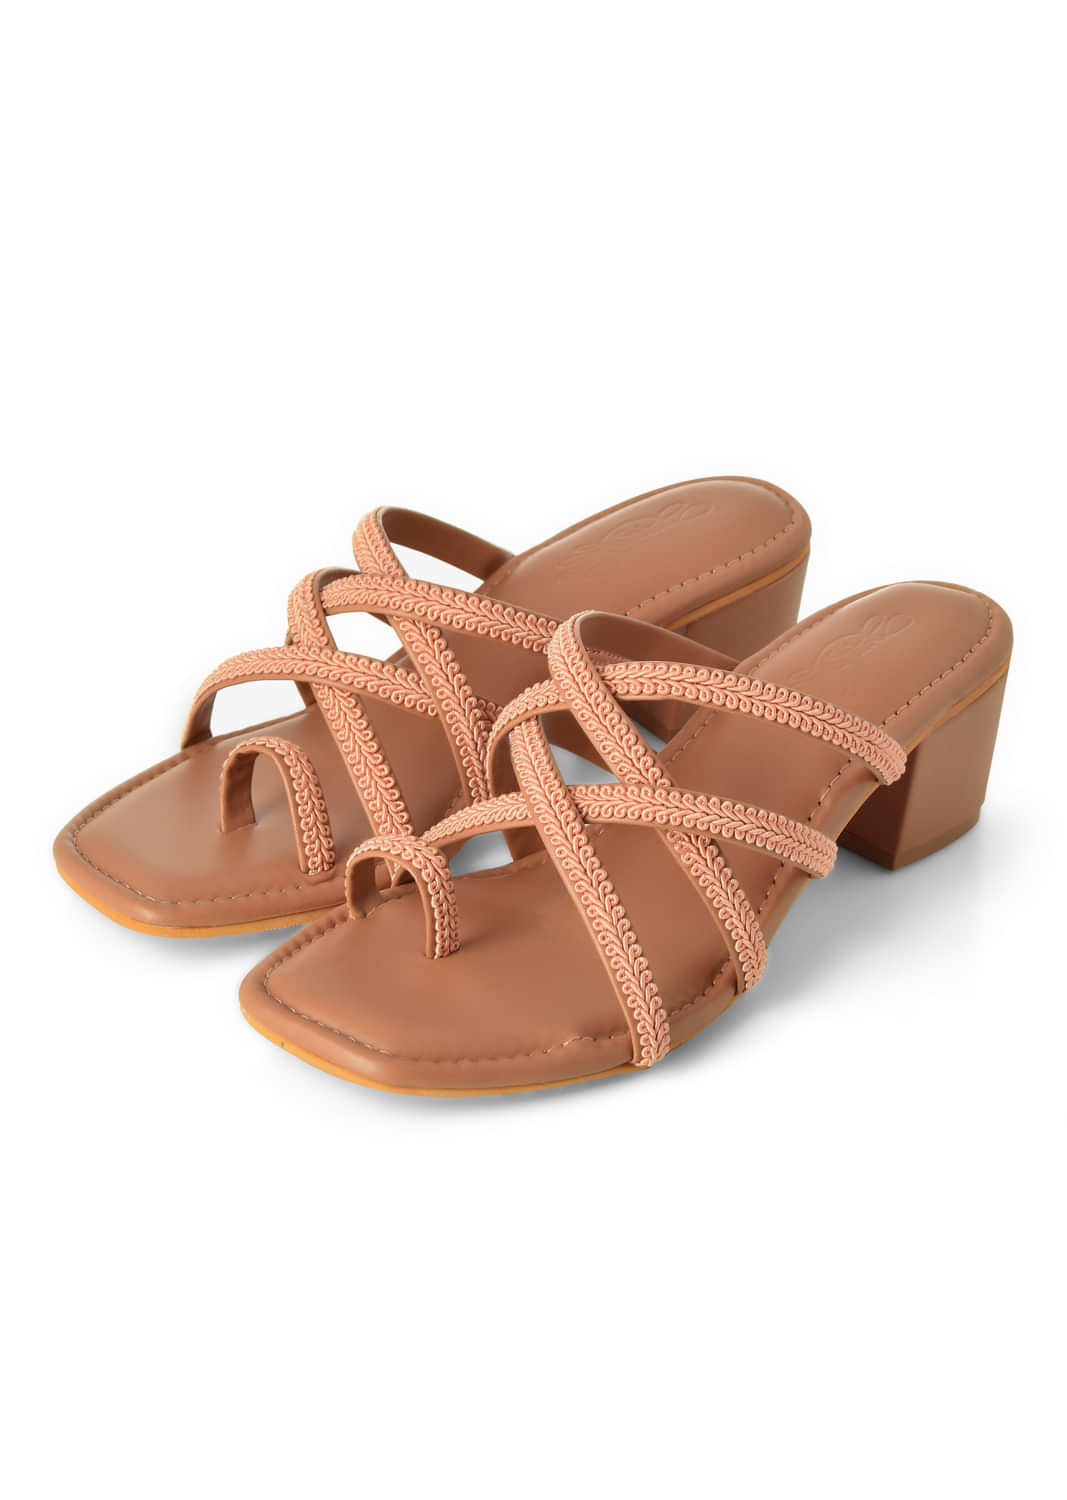 Baby Pink Lace Up Sandals With 1.5 Inch Block Heels